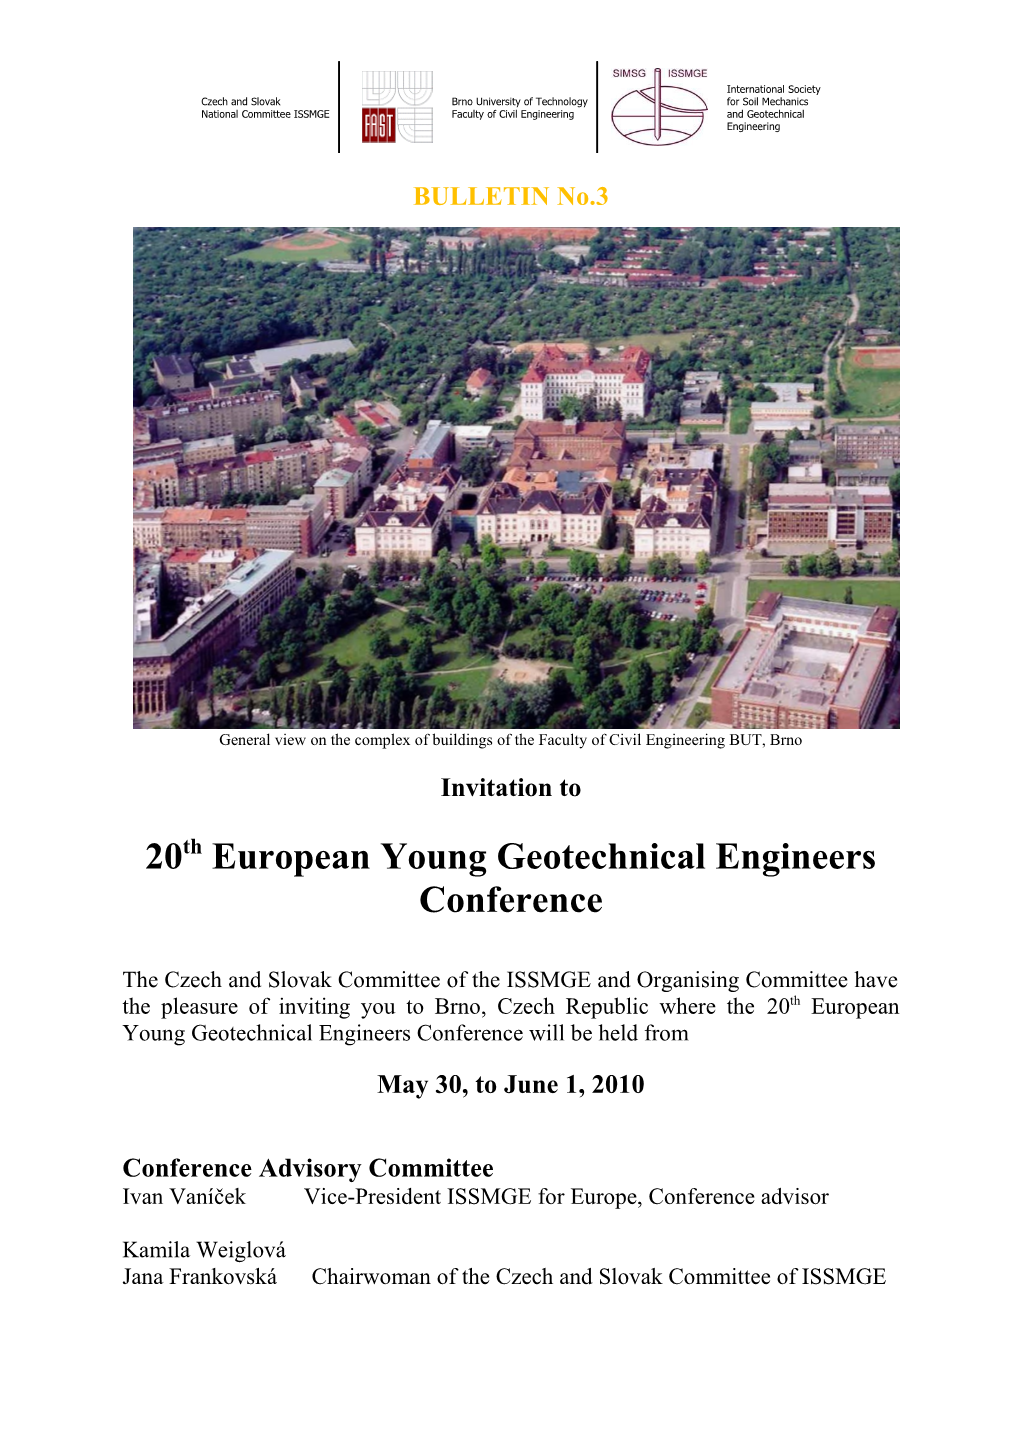 European Young Geotechnical Conference